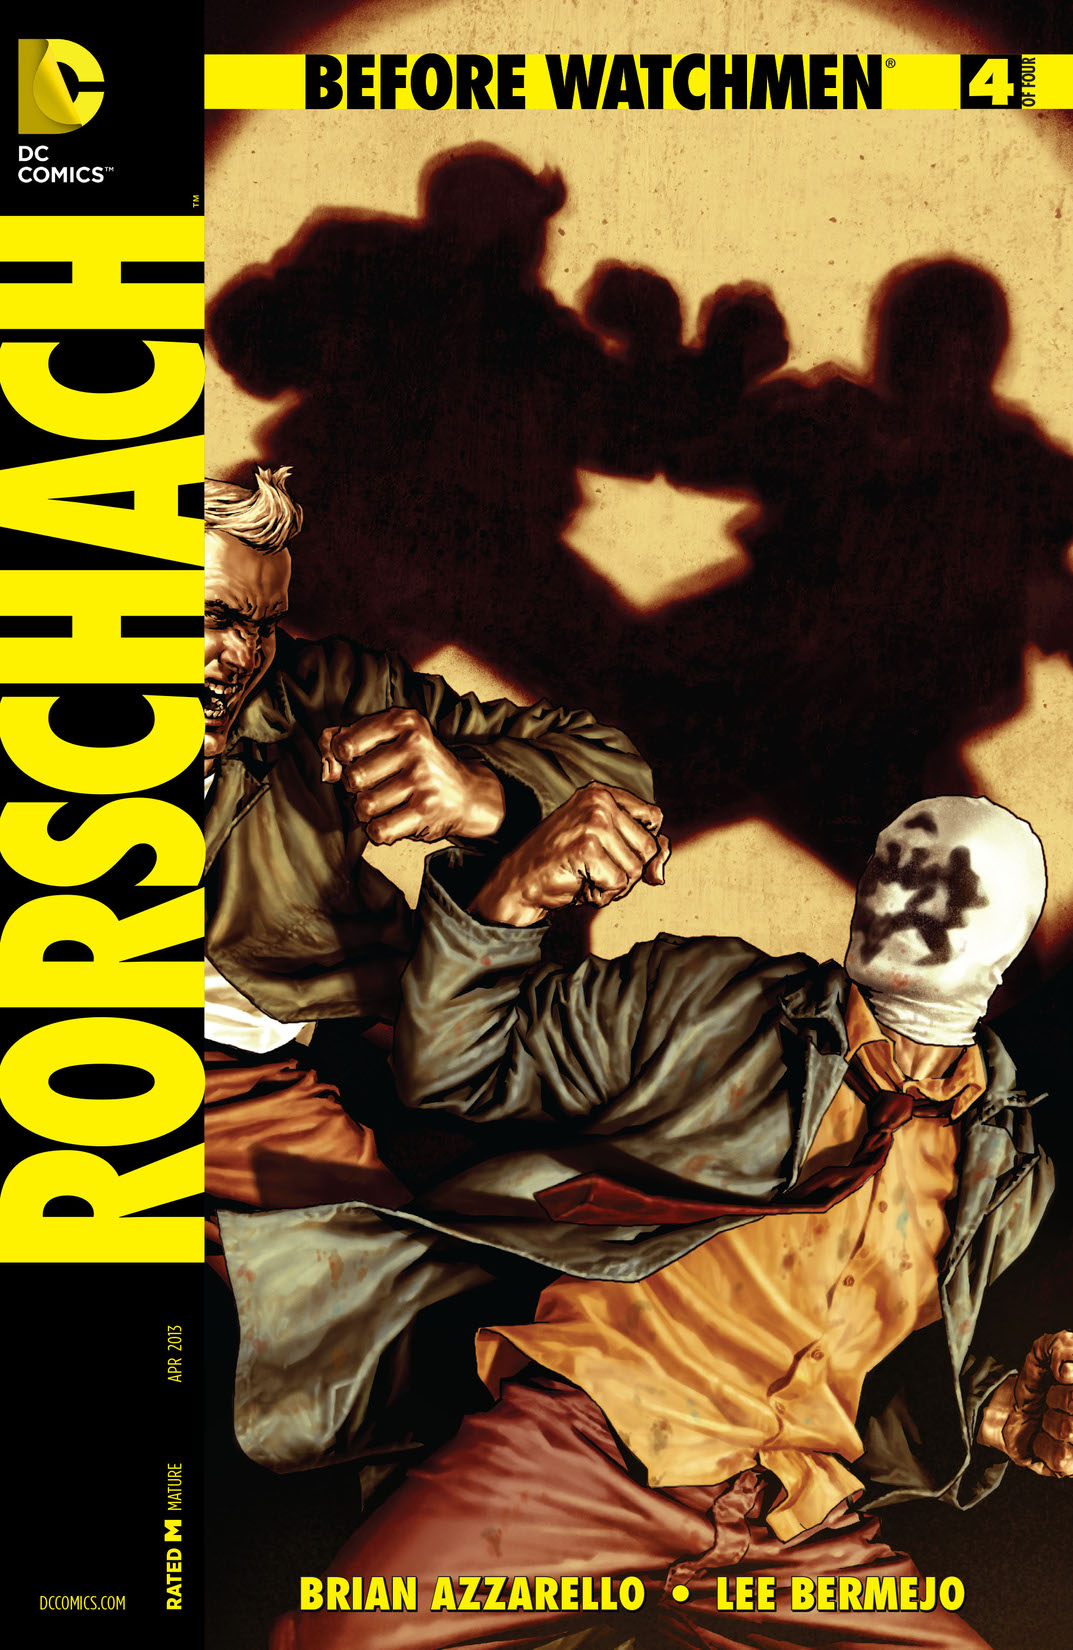 Before Watchmen: Rorschach #4 preview images